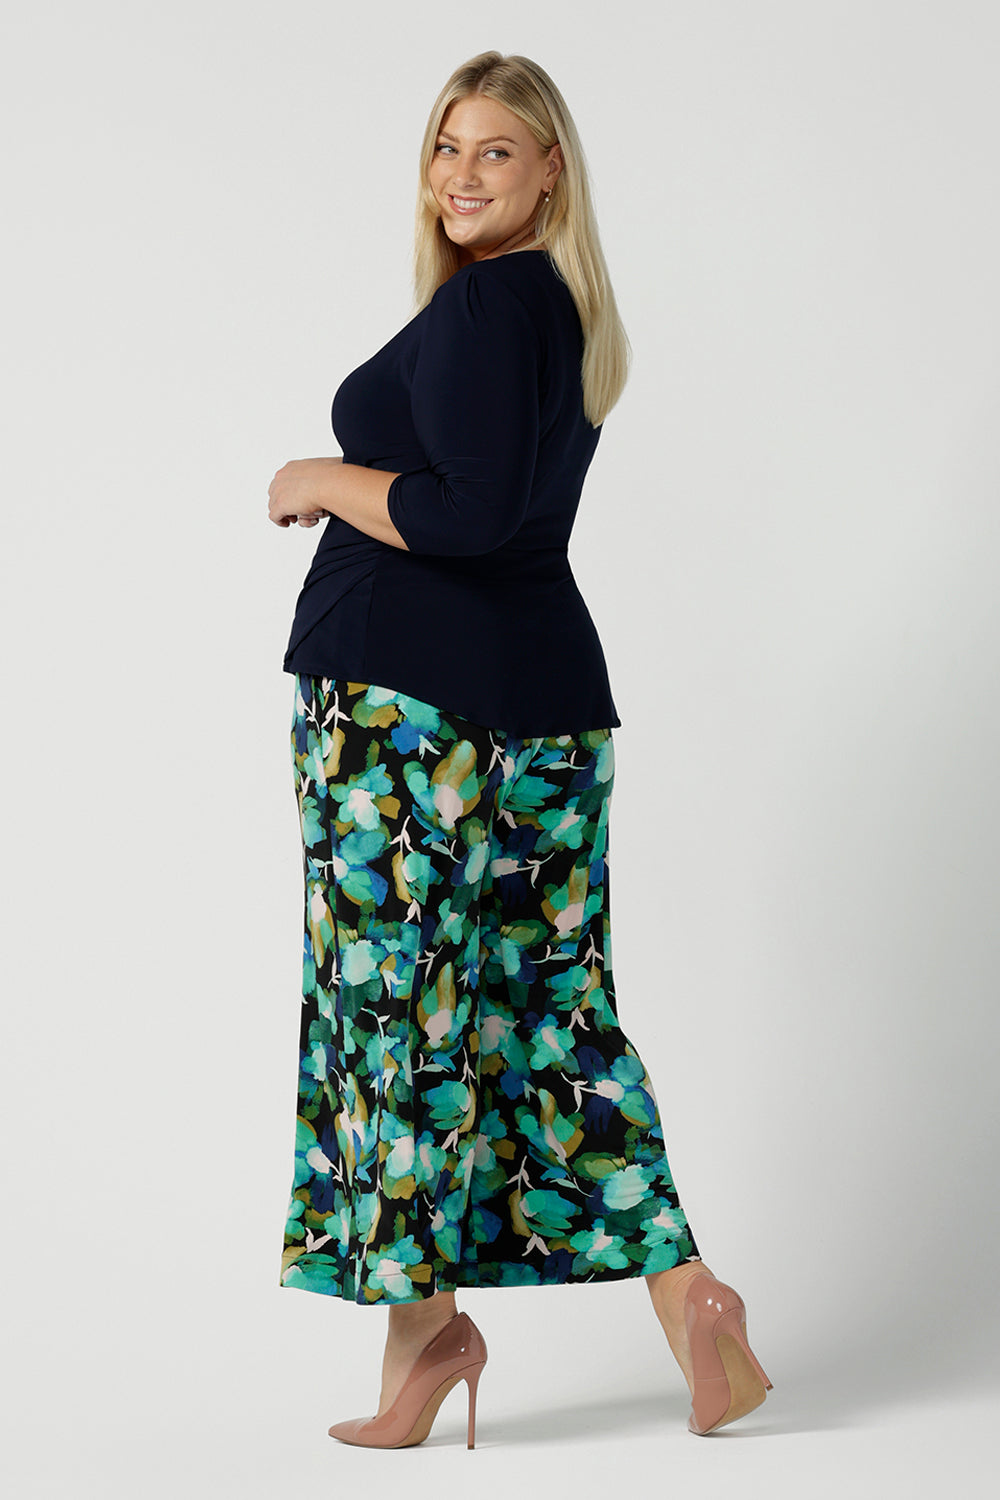 Back view of a size 18 woman wears the Dany culotte in Canopy, a full leg culotte with a canopy print. A bold green colour splatter print. Styled back with pink heels and a navy wrap top. Made in Australia for women size 8 - 24.